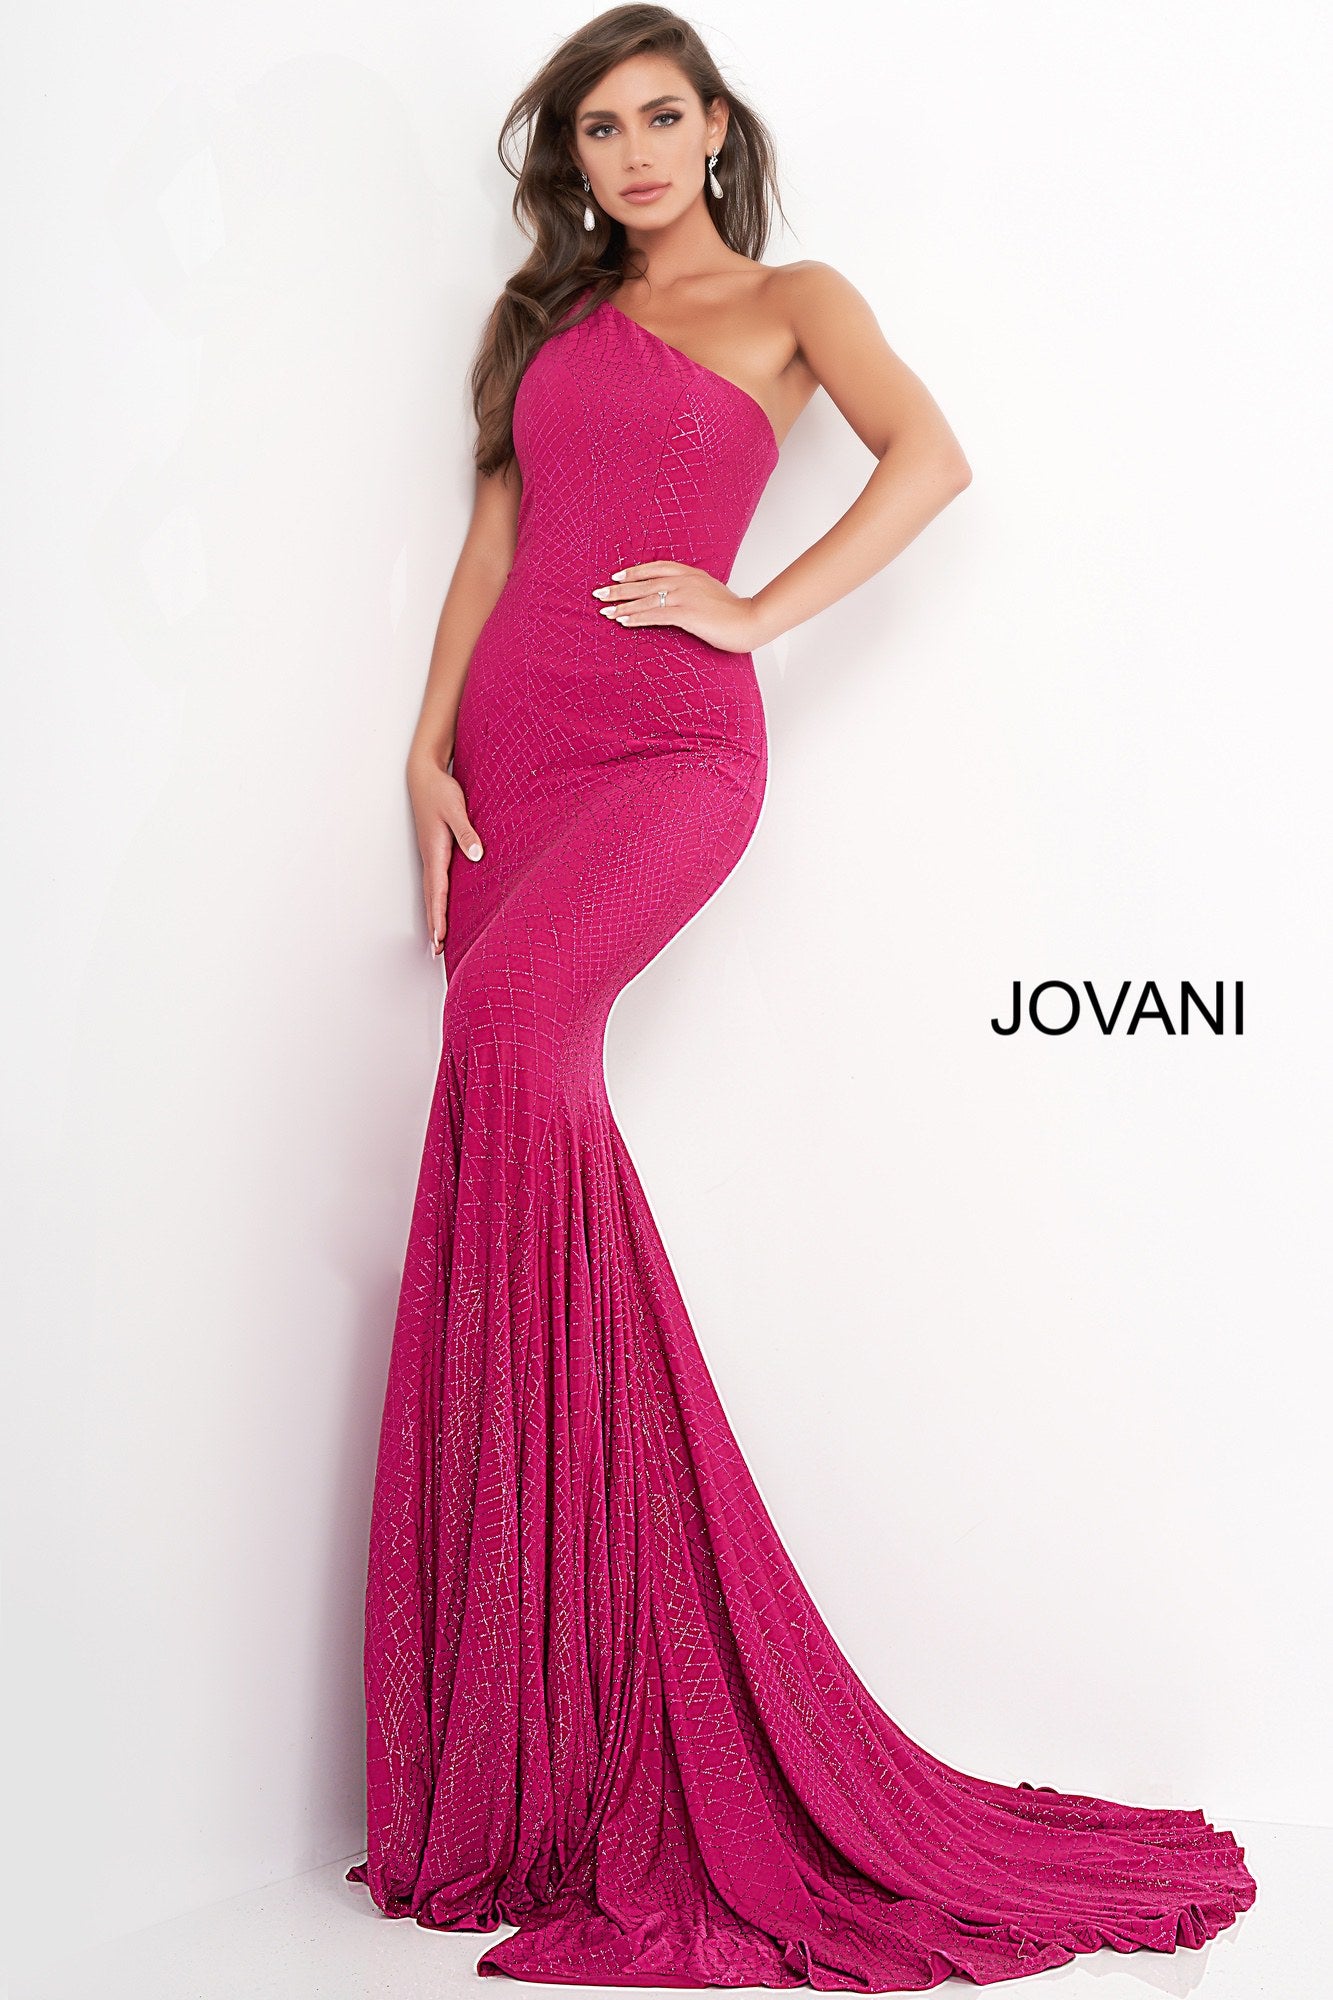 Jovani 1119 is a long fitted stretch jersey Prom, Pageant, Evening & Wedding Dress. Featuring a glitter embellished jersey. One shoulder neckline. Slighty Flared skirt. Stretch jersey dress embellished with glitter, form fitting silhouette with straight skirt, floor length, sleeveless bodice with one shoulder asymmetric neckline. Excellent Bridesmaid & Wedding Guest Dress!  Available Colors: magenta, navy, off white/gold